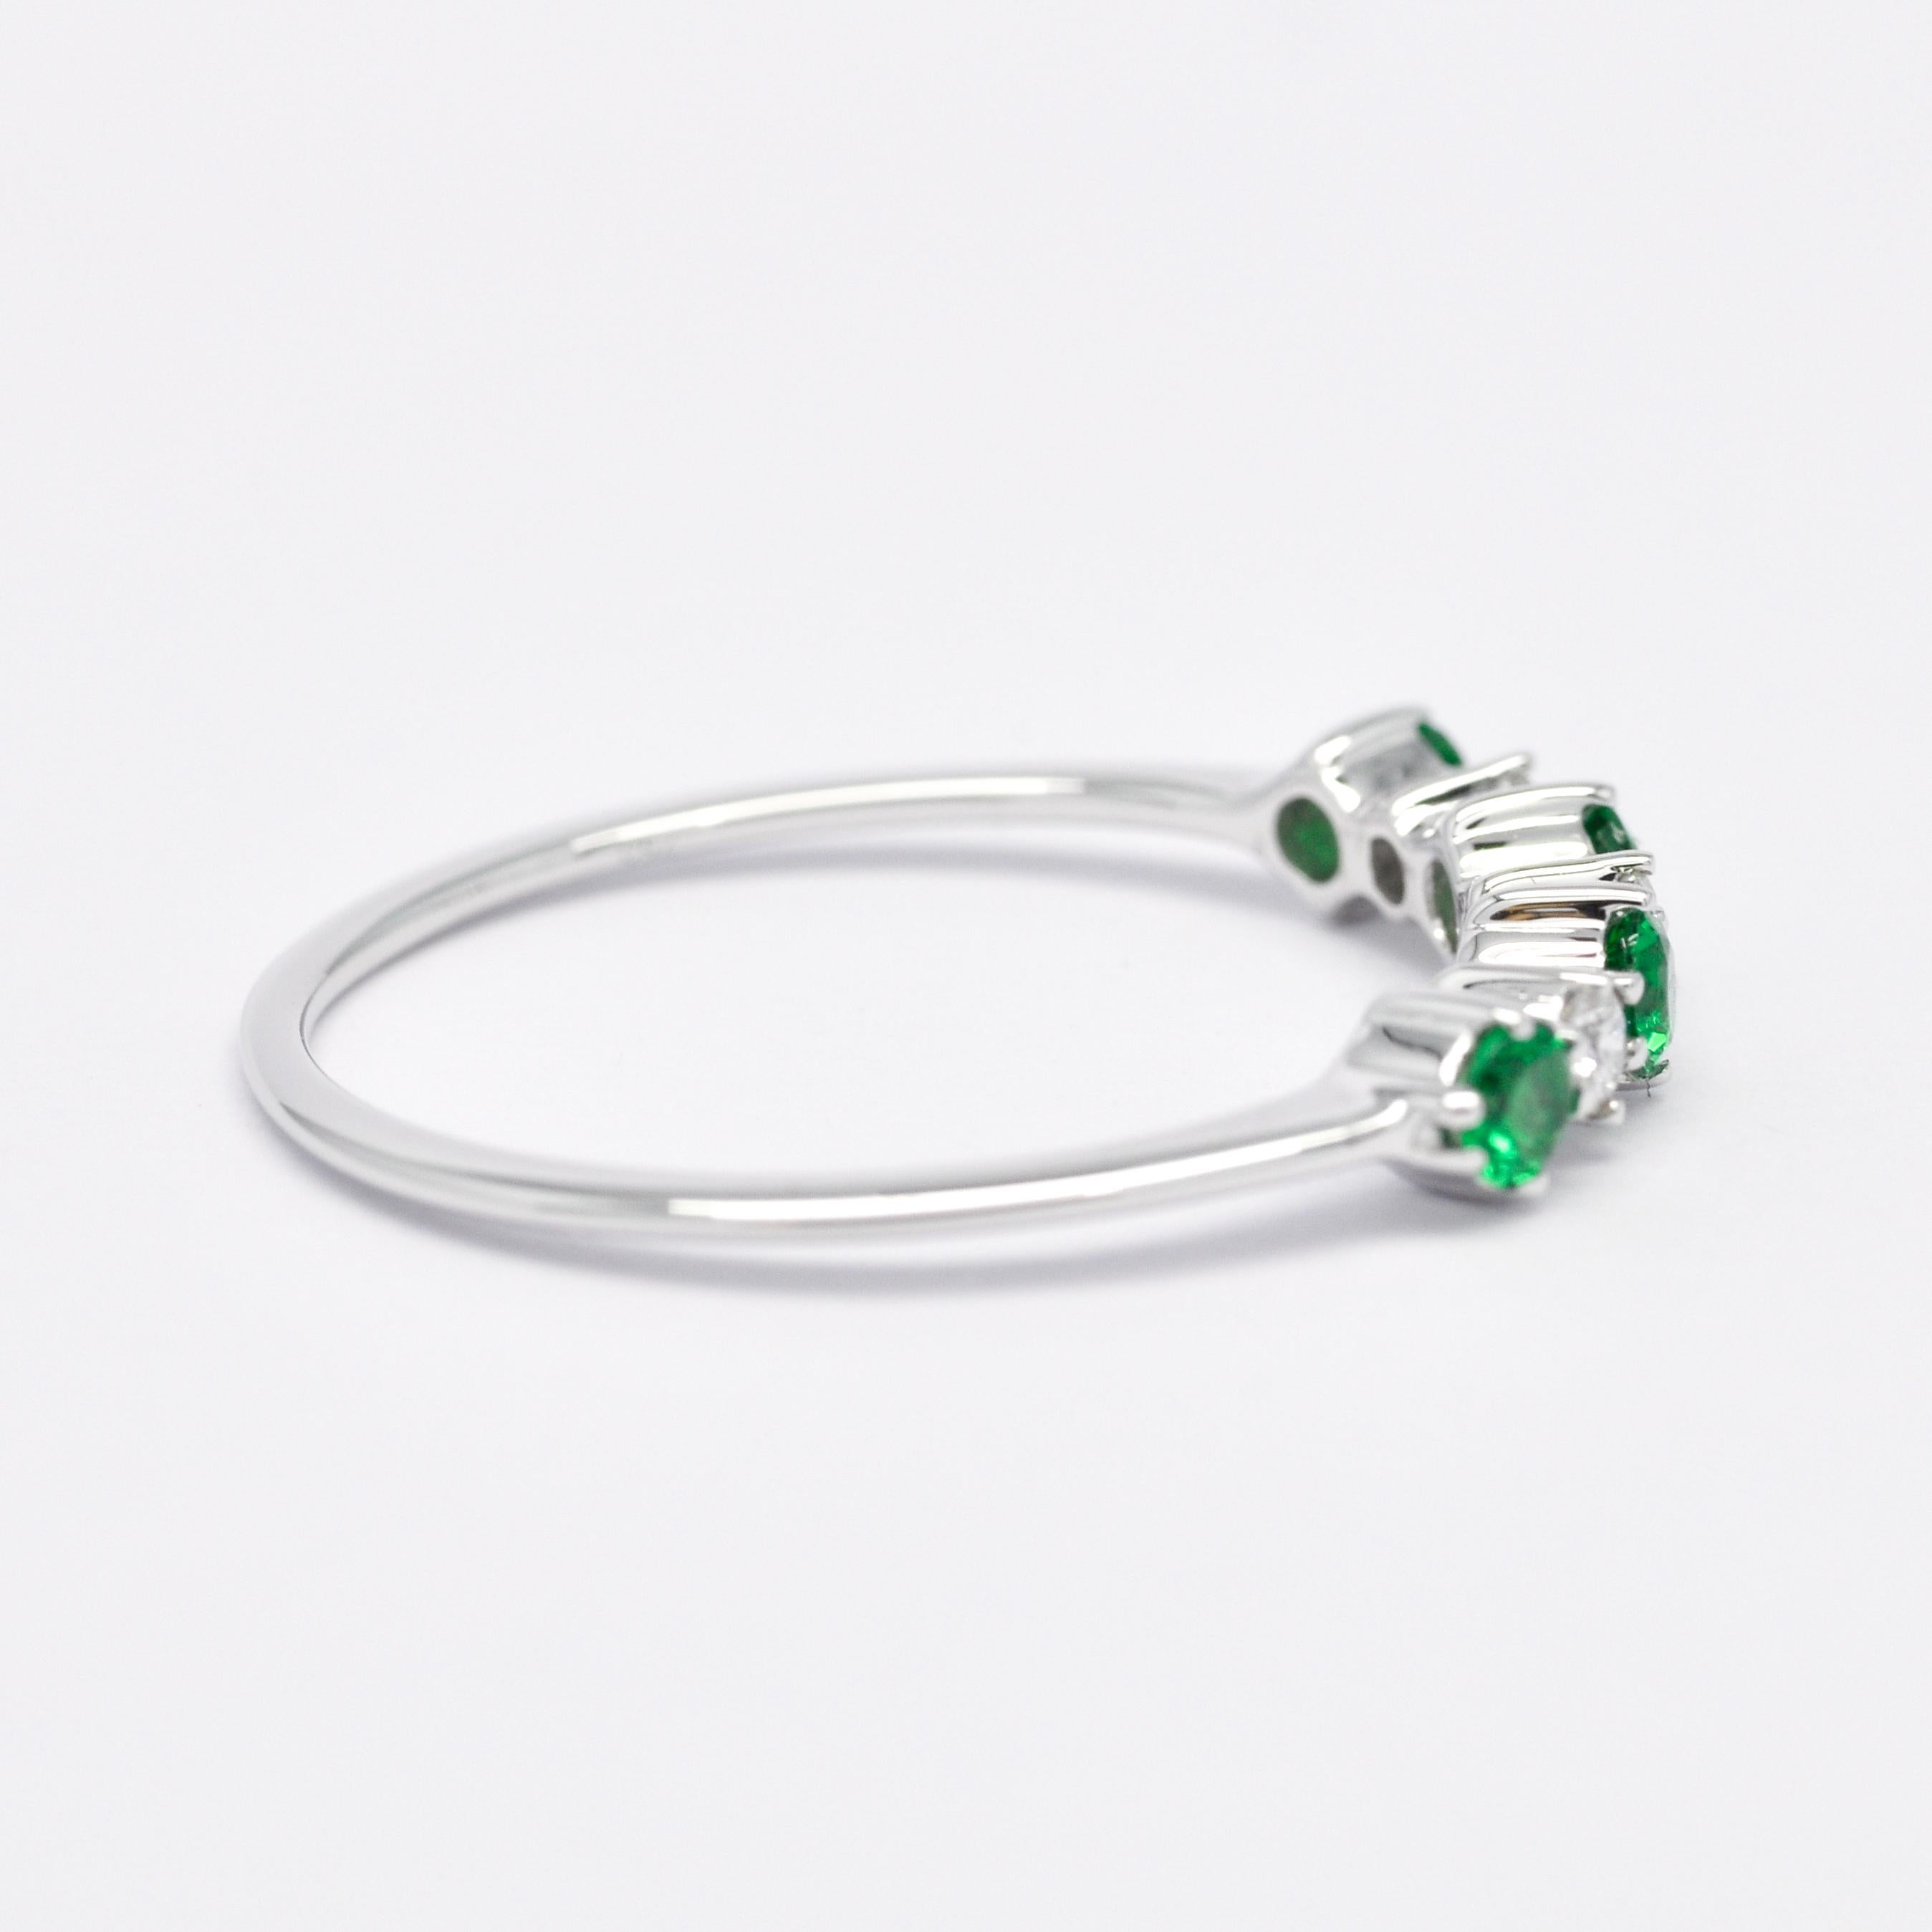 The inclusion of Emerald Green Stones and Diamonds 18kt White Gold Ring enriches its symbolism and visual appeal, elevating it to an even more captivating piece for engagements and anniversaries alike.

Emerald green, with its lush and verdant hue,